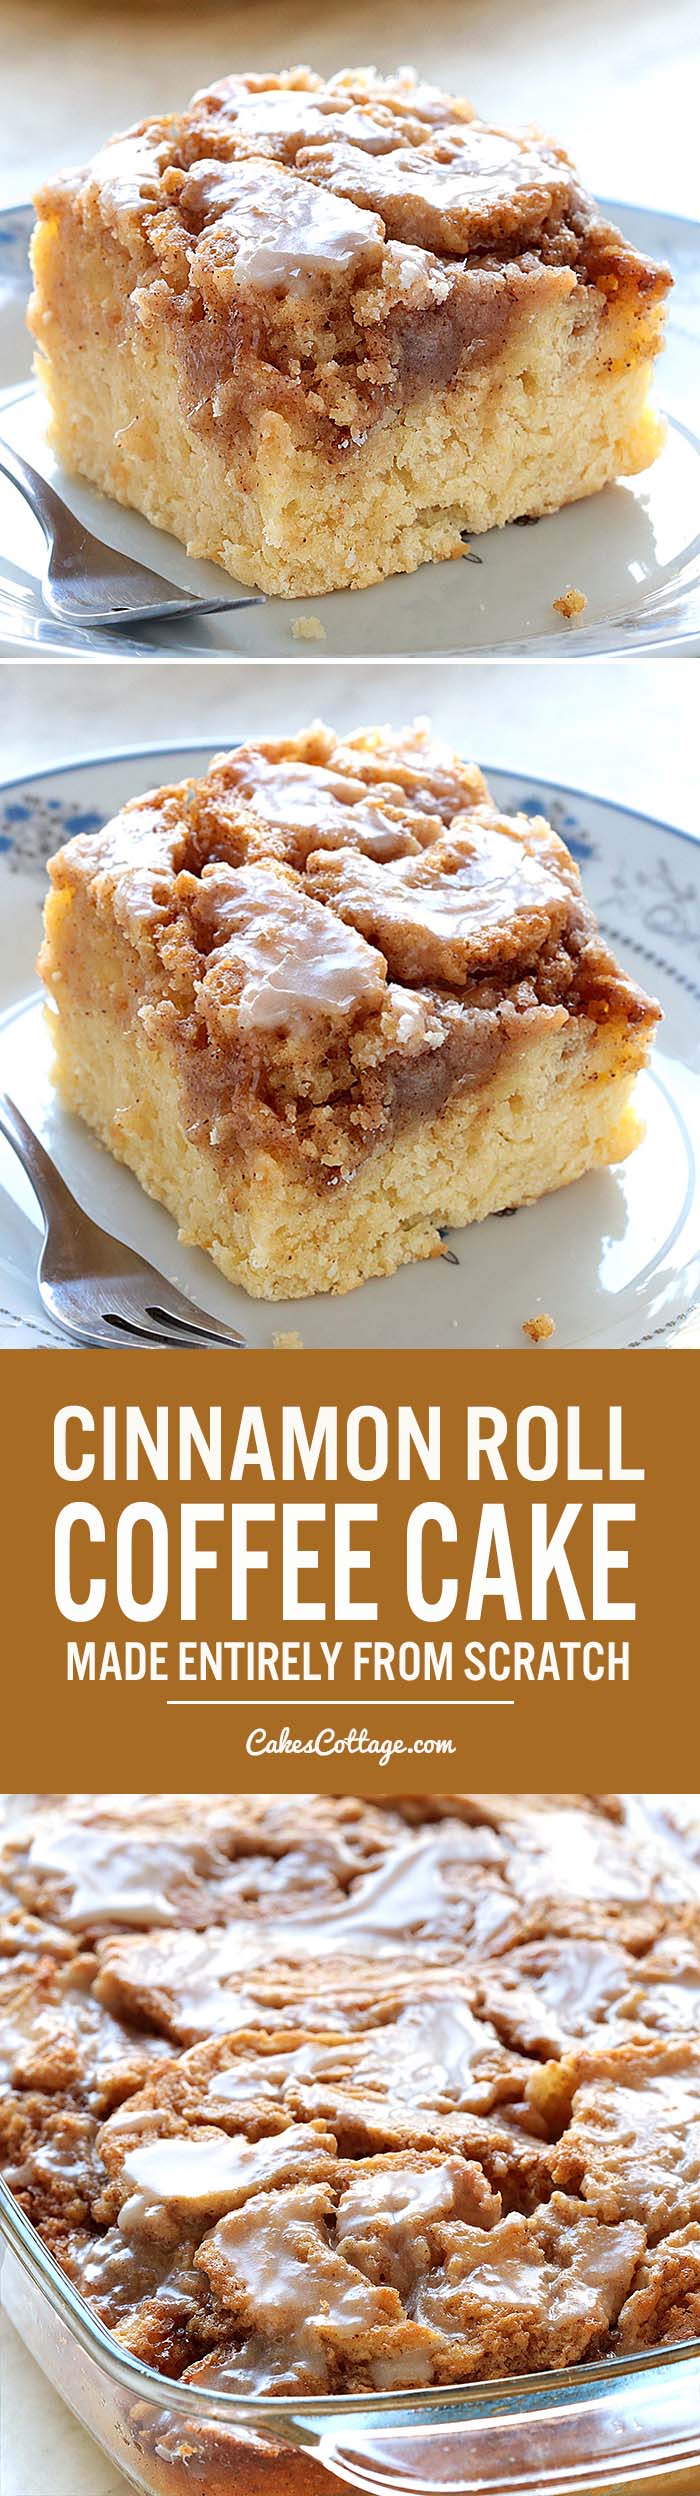 Easy Cinnamon Roll Coffee Cake is simple and quick recipe for delicious, homemade coffee cake from scratch, with ingredients that you already have in pantry.